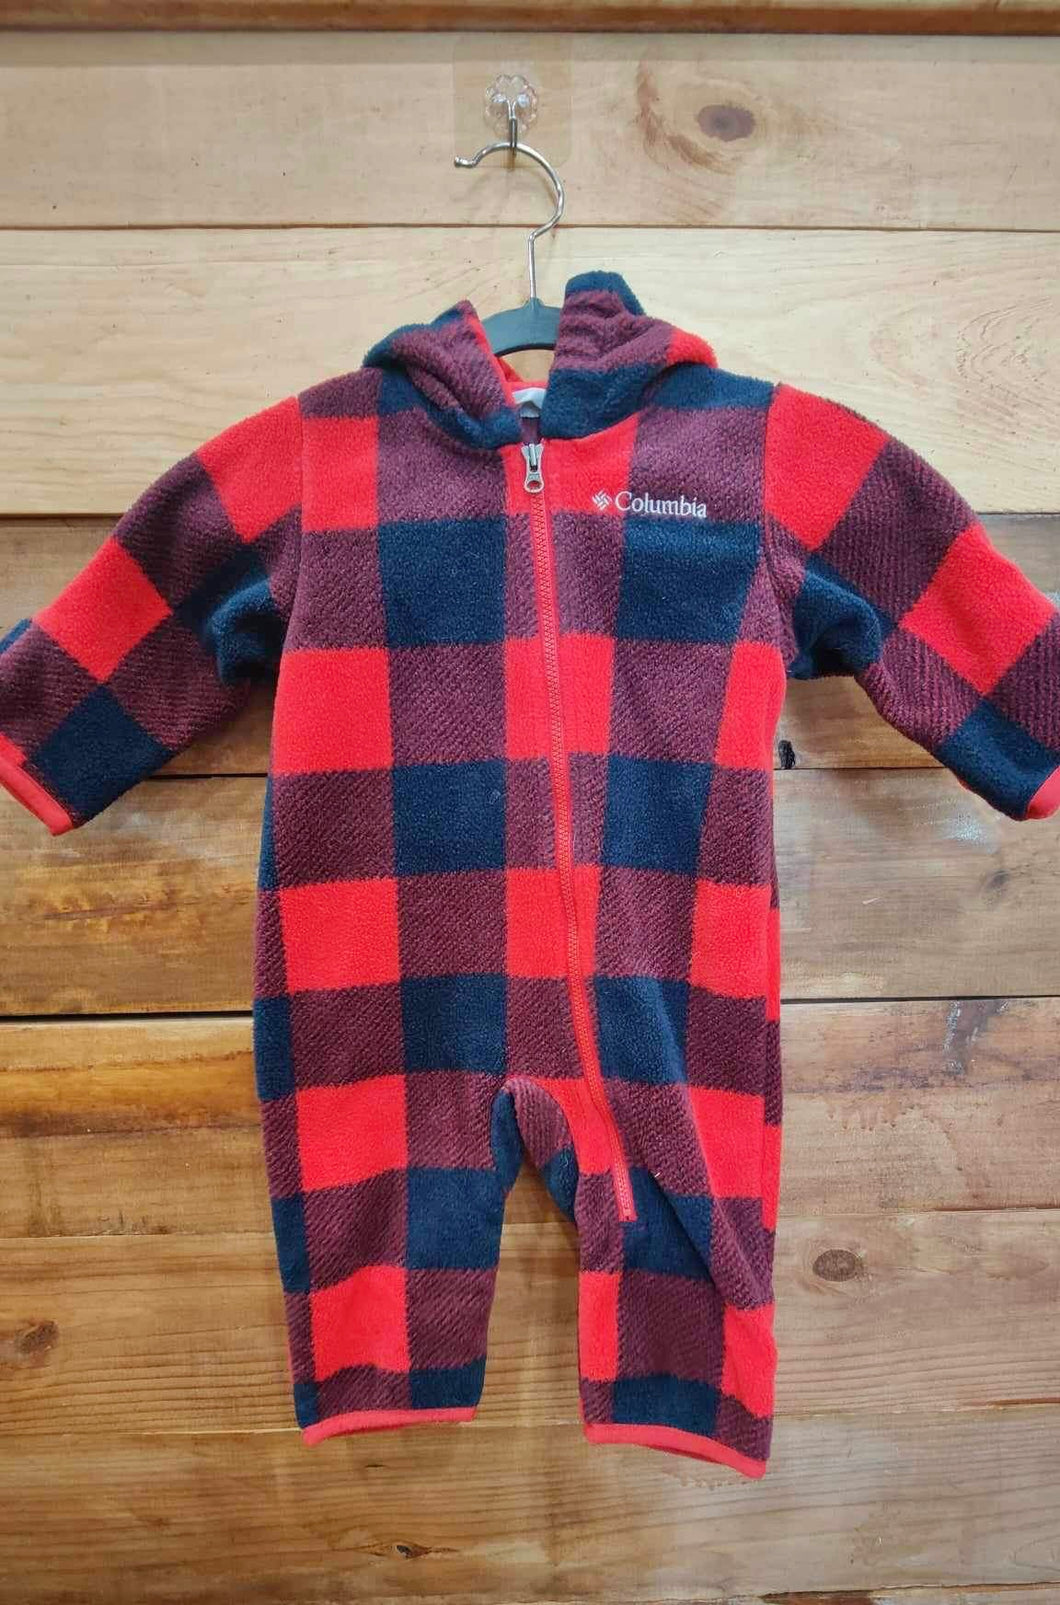 Columbia Red Plaid Bunting Suit Size 3-6m